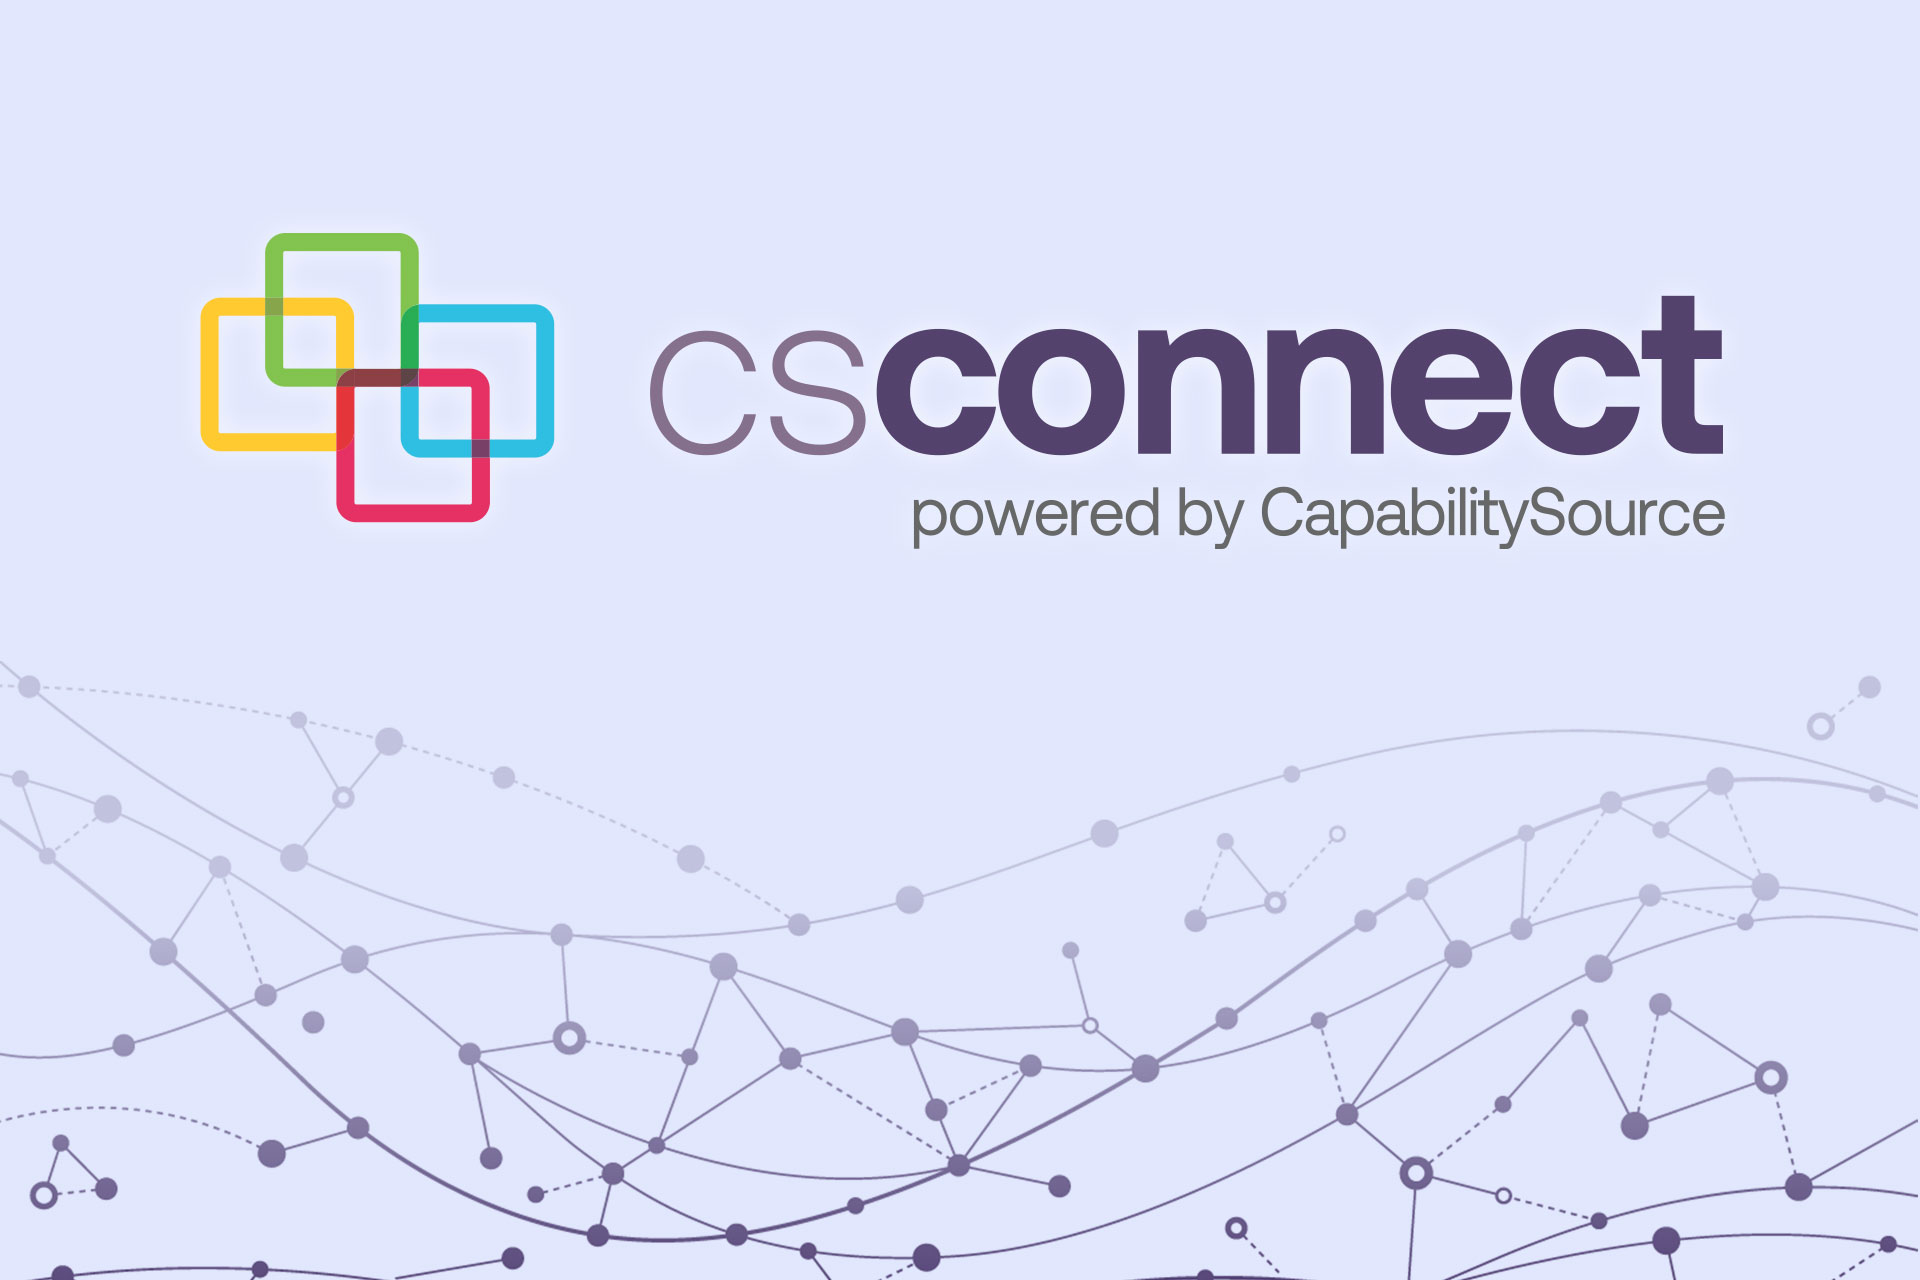 CS Connect logo and background